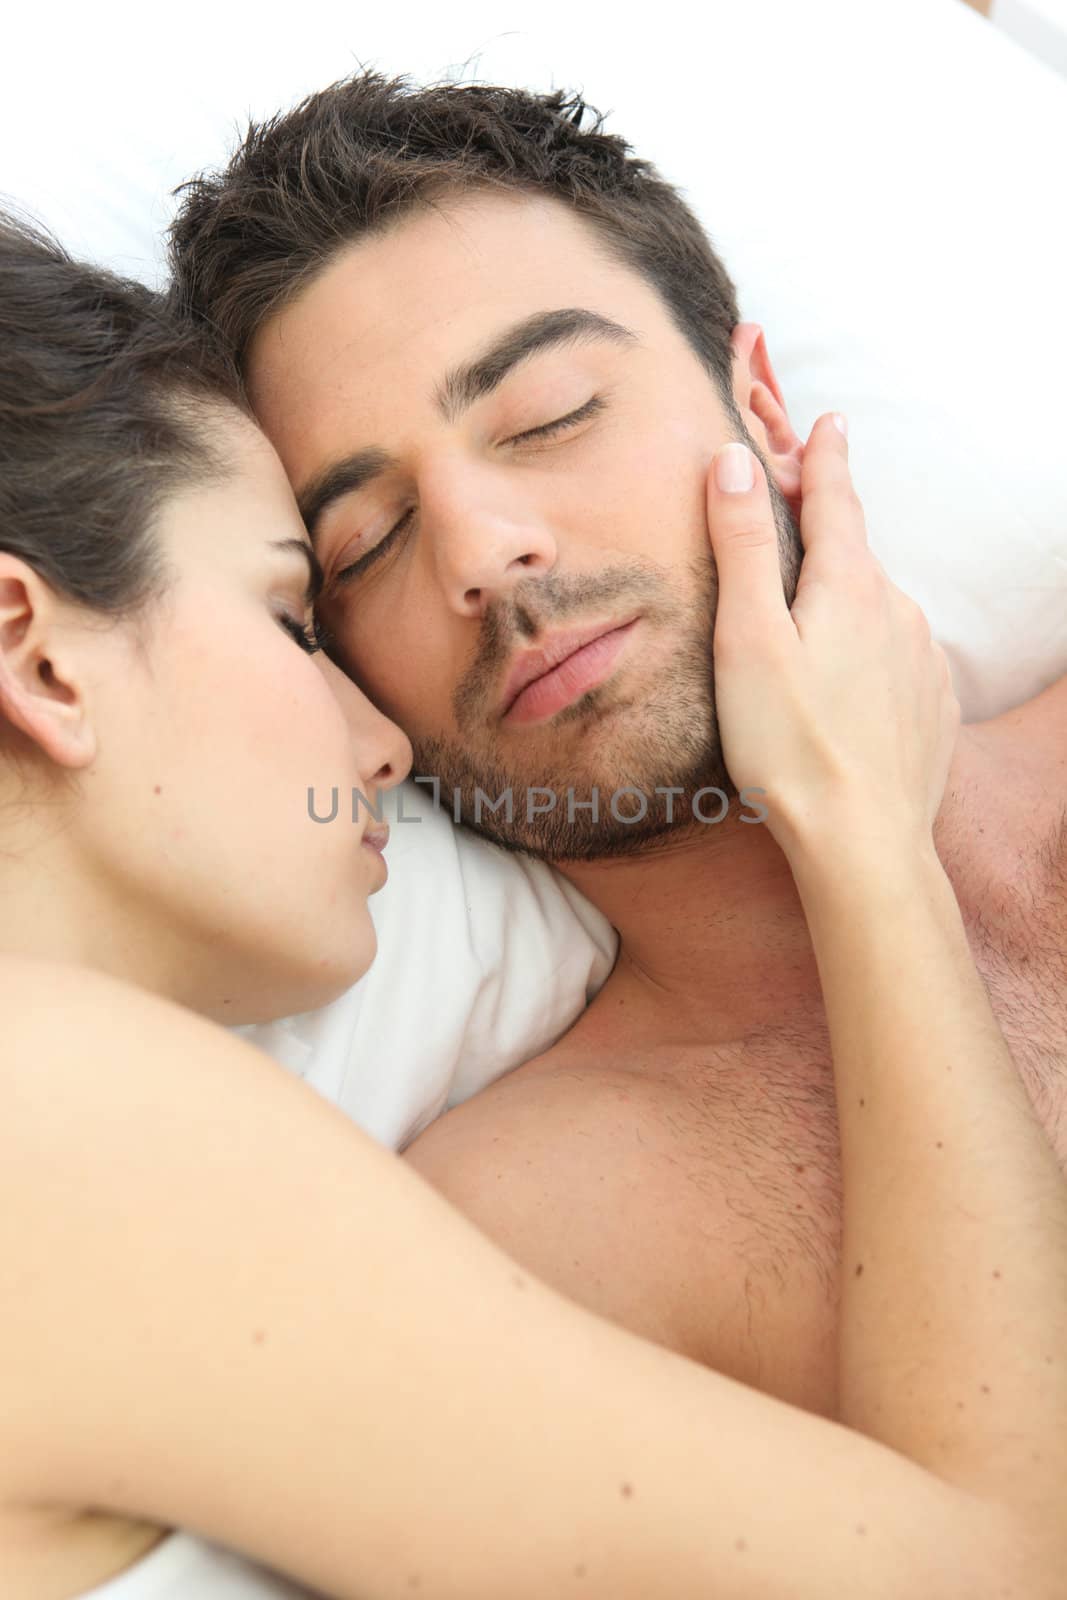 Couple asleep in bed